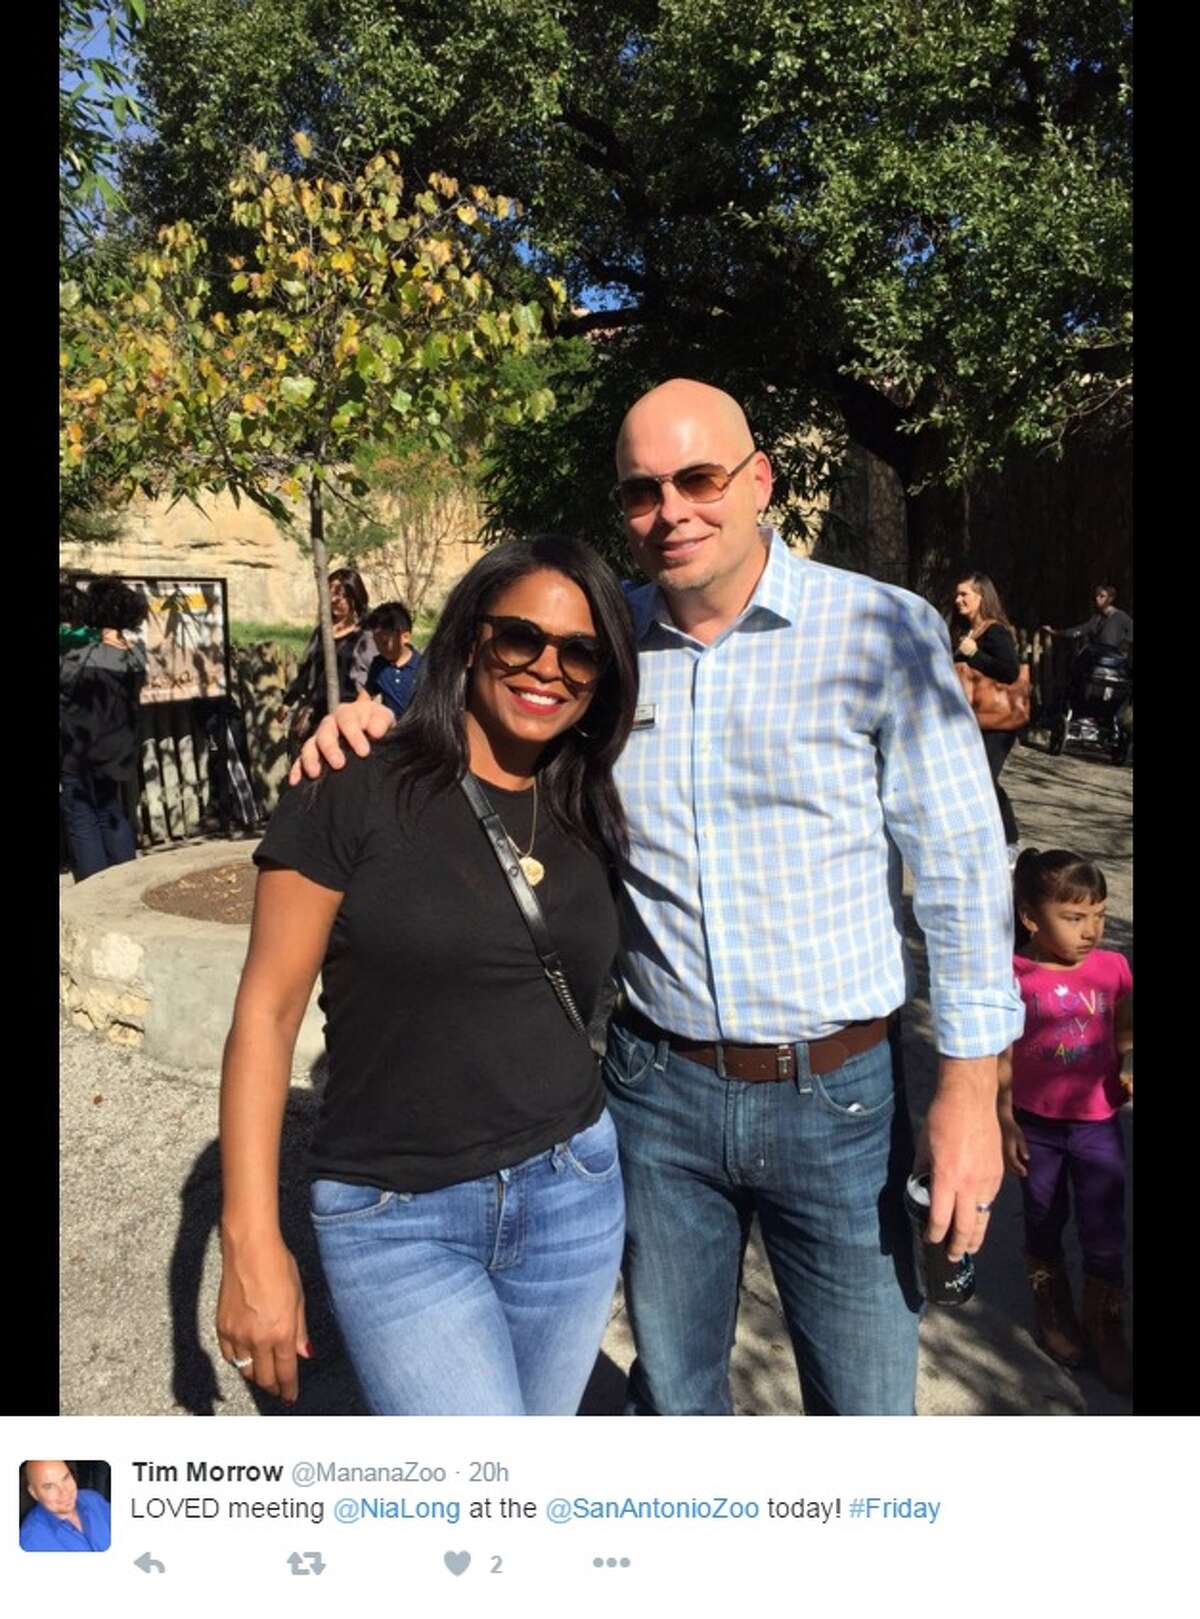 In most places, zoo outings take a backseat during winter months but as Spurs Assistant Coach Ime Udoka's celebrity wife, Nia Long, found out – that's not the case in San Antonio.